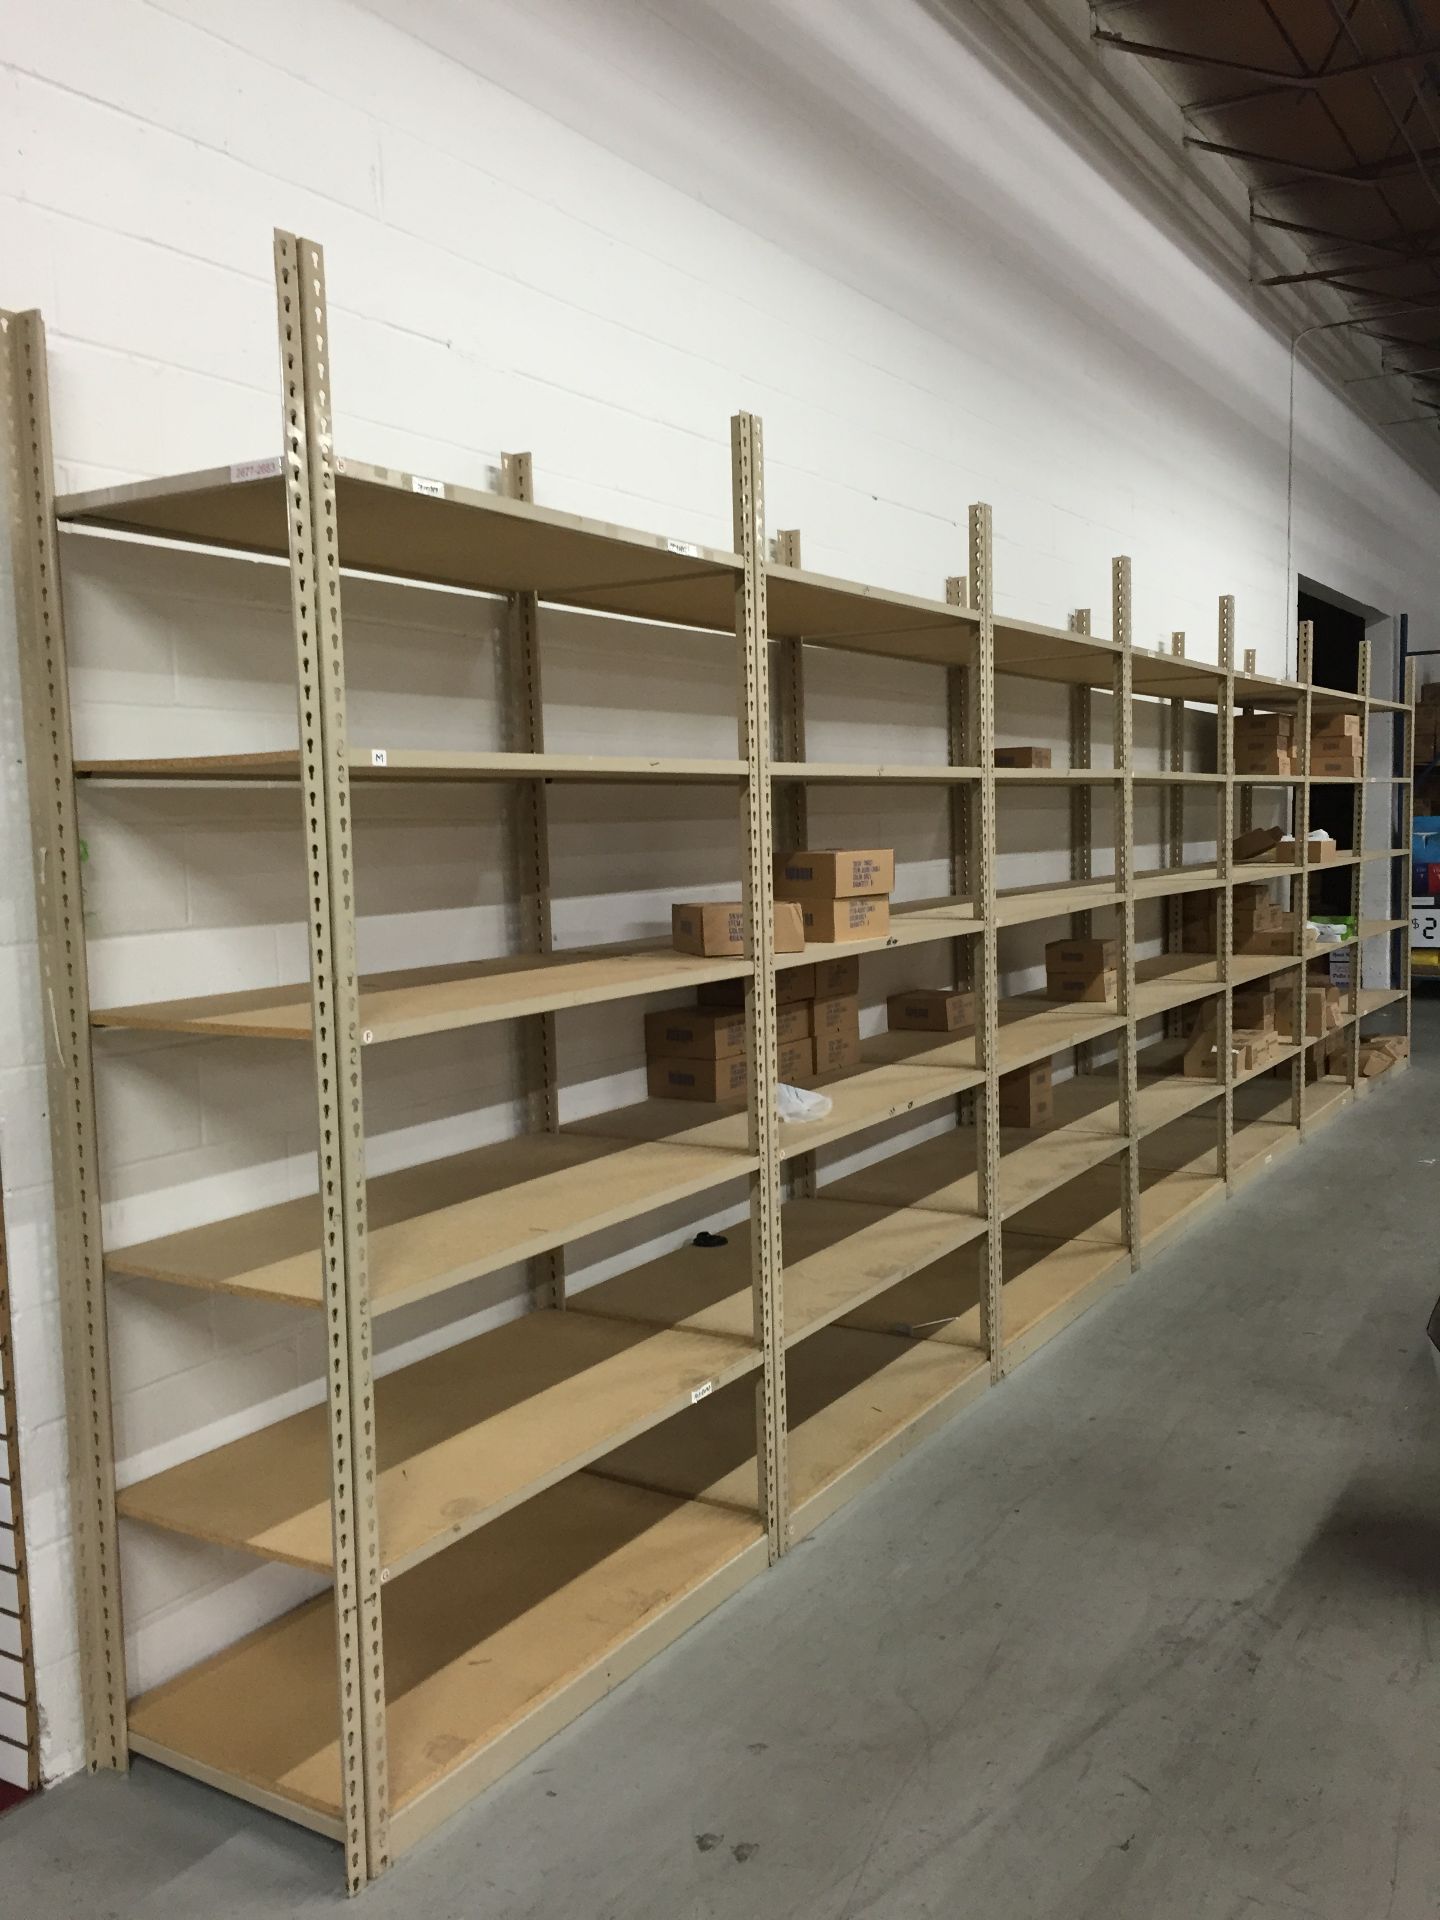 10 SECTIONS OF RIVETIER INDUSTRIAL SHELVING,  EACH SIZE 28"D X 65"W X 84"H, COLOR: MANILA, 5 SHELVES